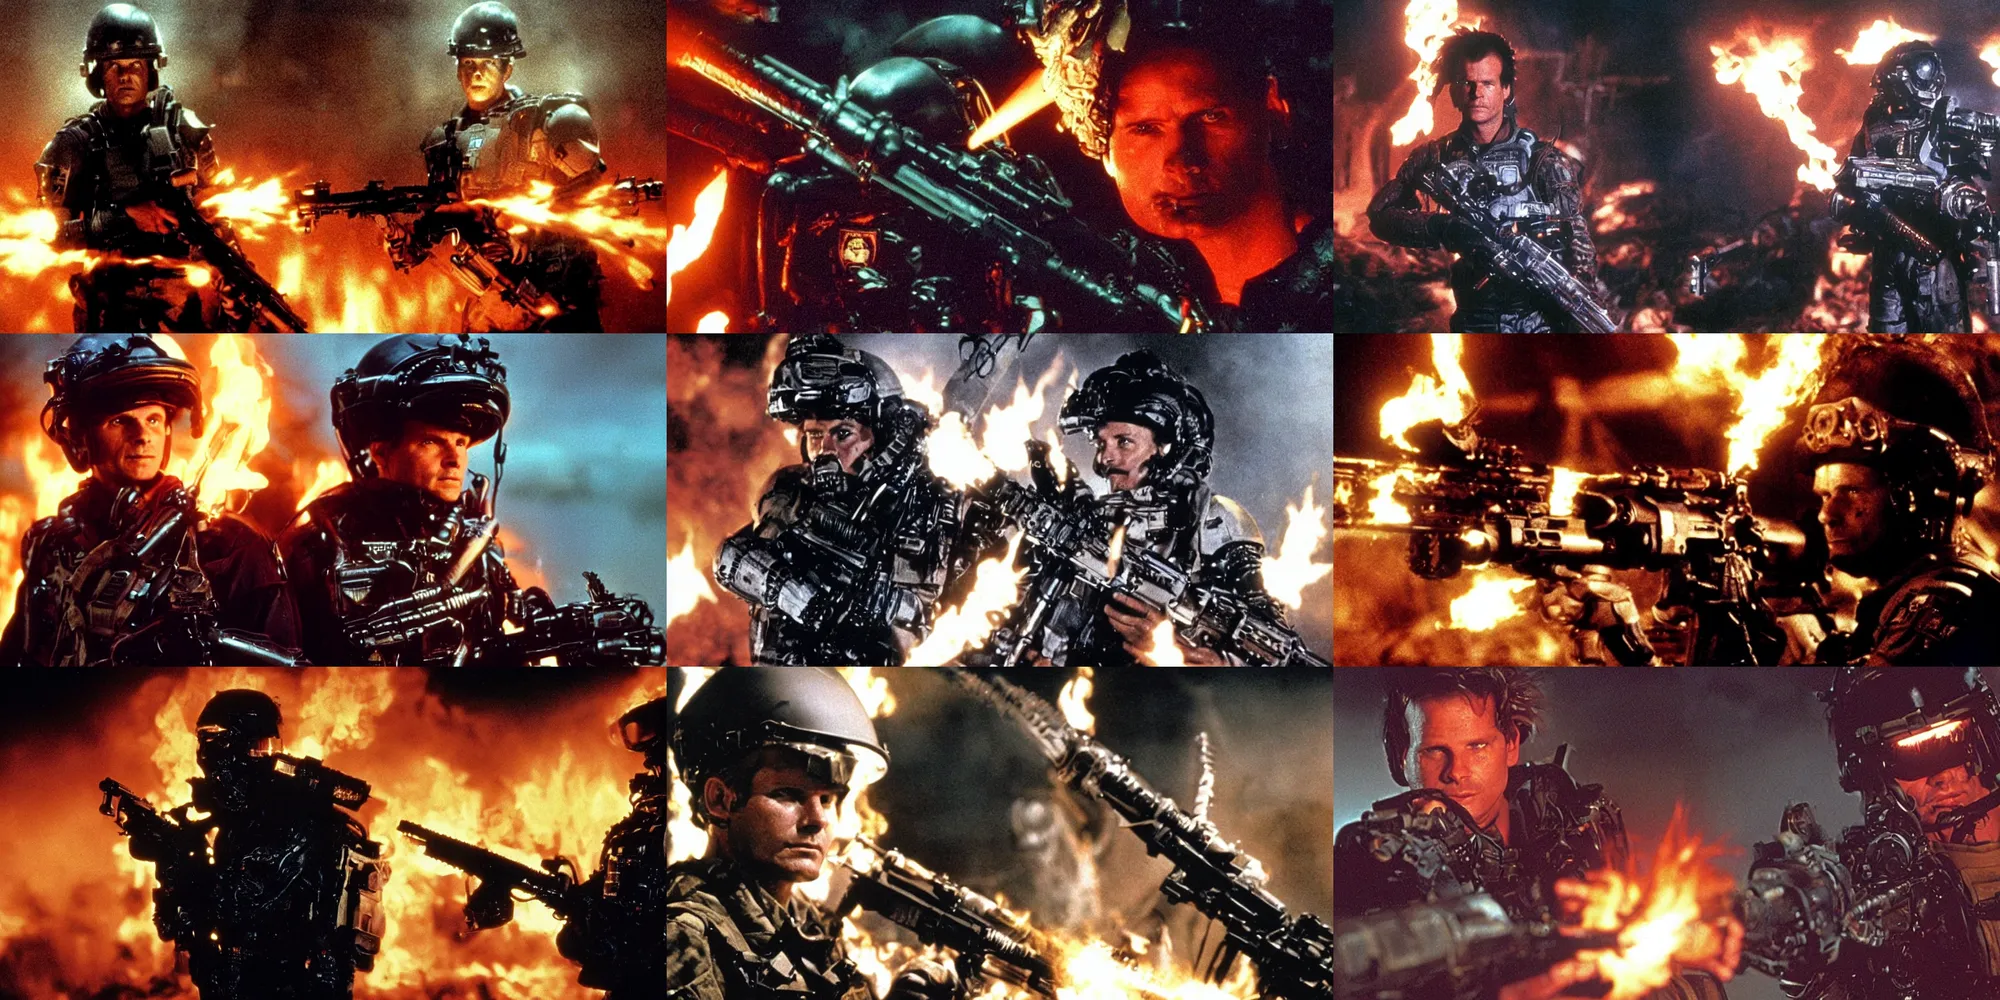 Prompt: Portrait of Colonial Marine Hudson (30 year old Bill Paxton) holding a M41A pulse rifle, spikey hair, wearing armor and helmet, darkness and flames, dramatic lighting , film still from Aliens by James Cameron 1986